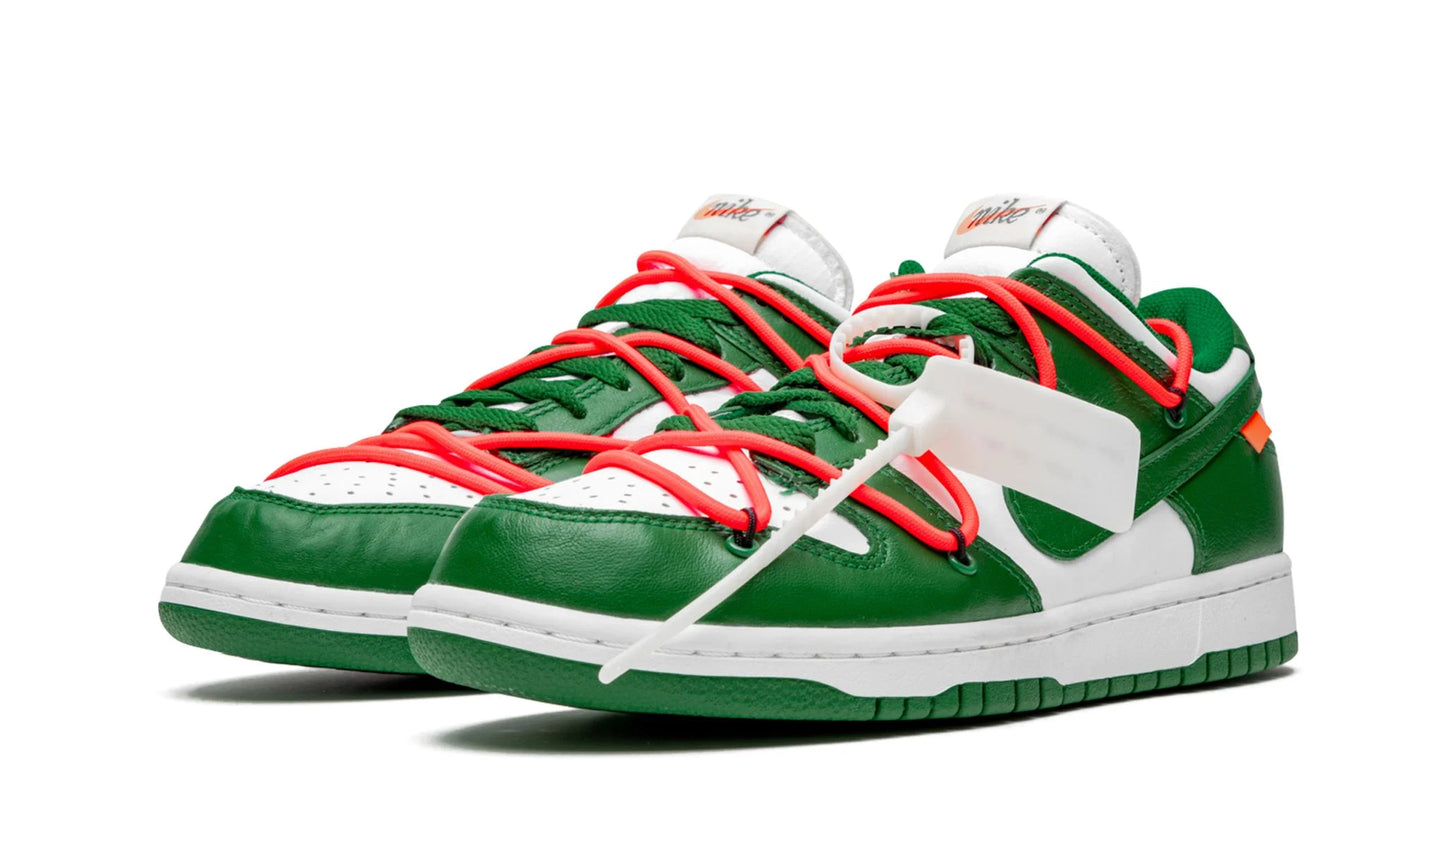 Nike Dunk Low "Off-White - Pine Green"